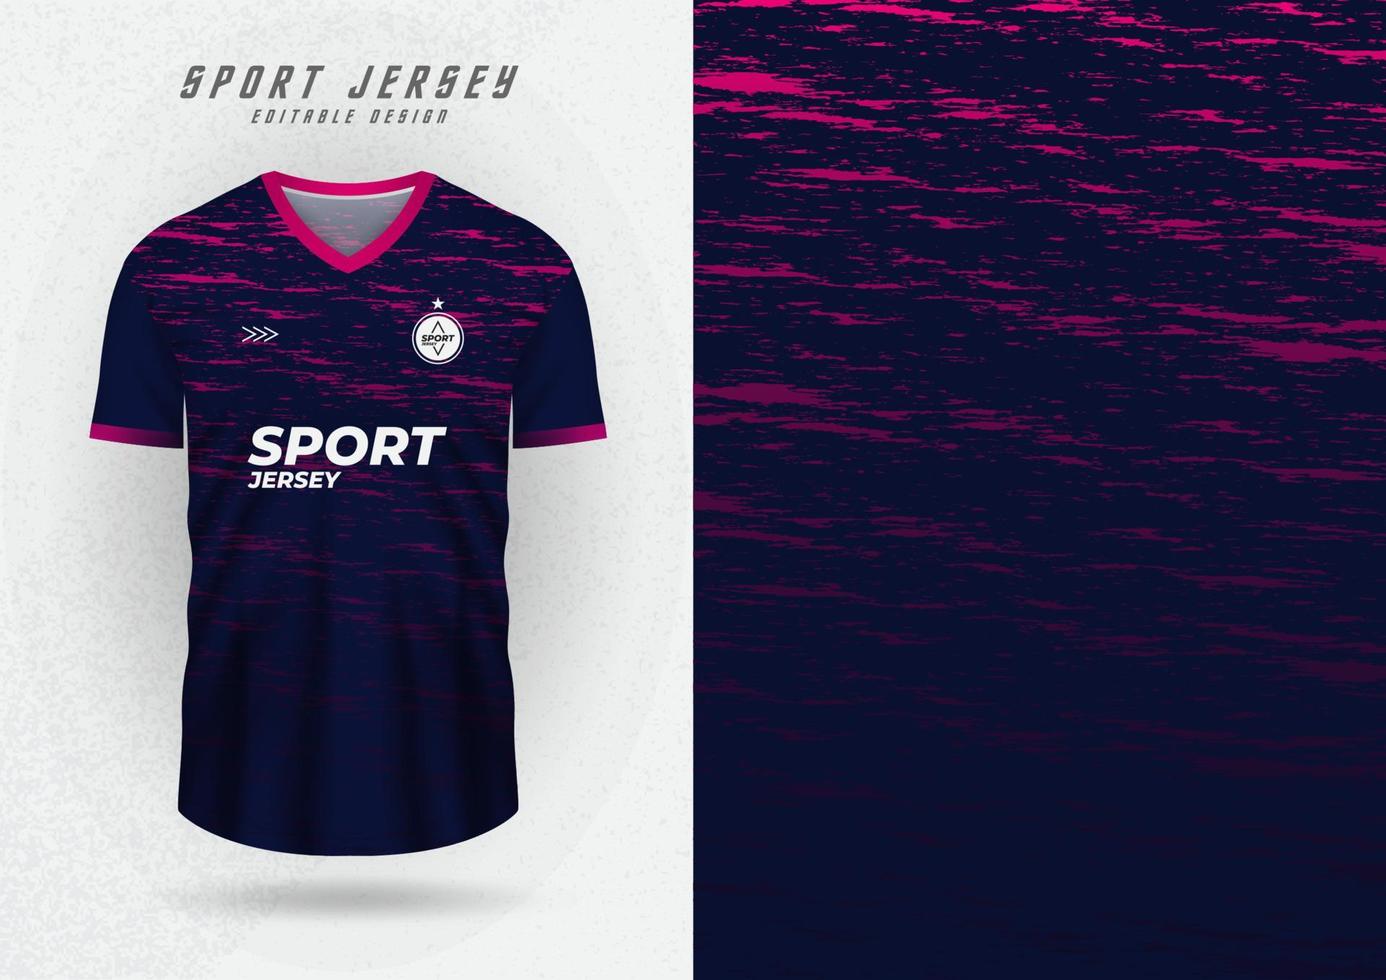 Mockup background for a pink-patterned navy jersey. vector